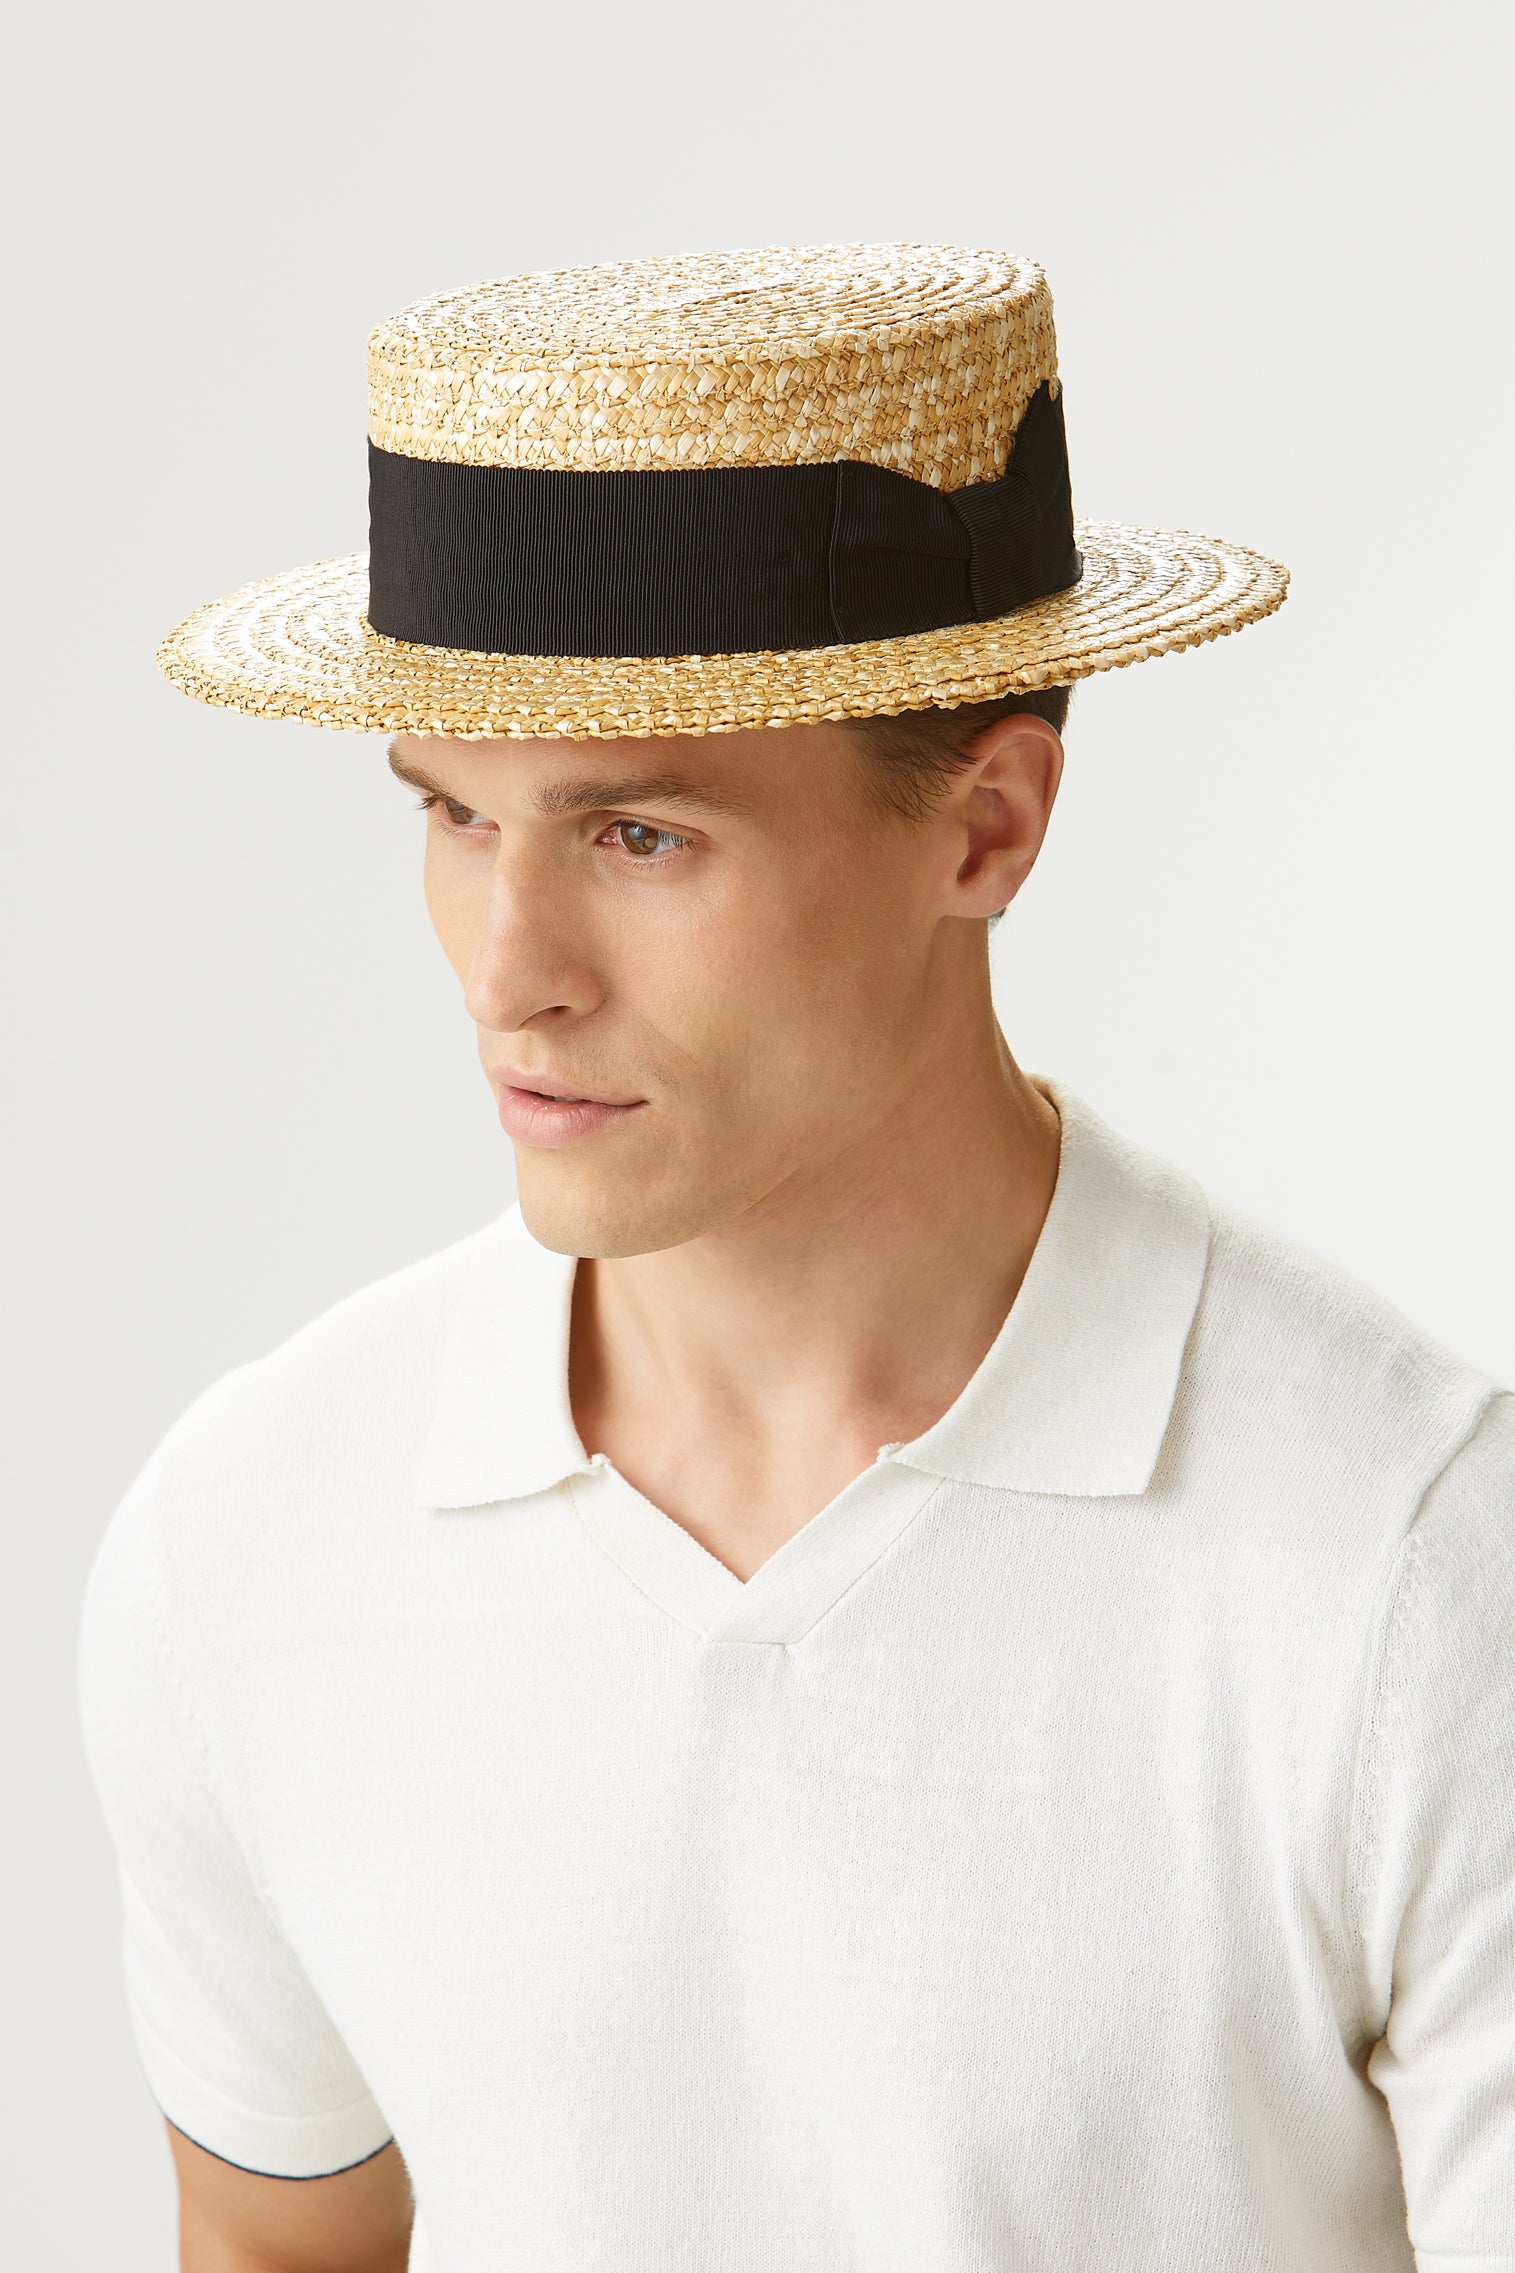 Classic Boater - Products - Lock & Co. Hatters London UK